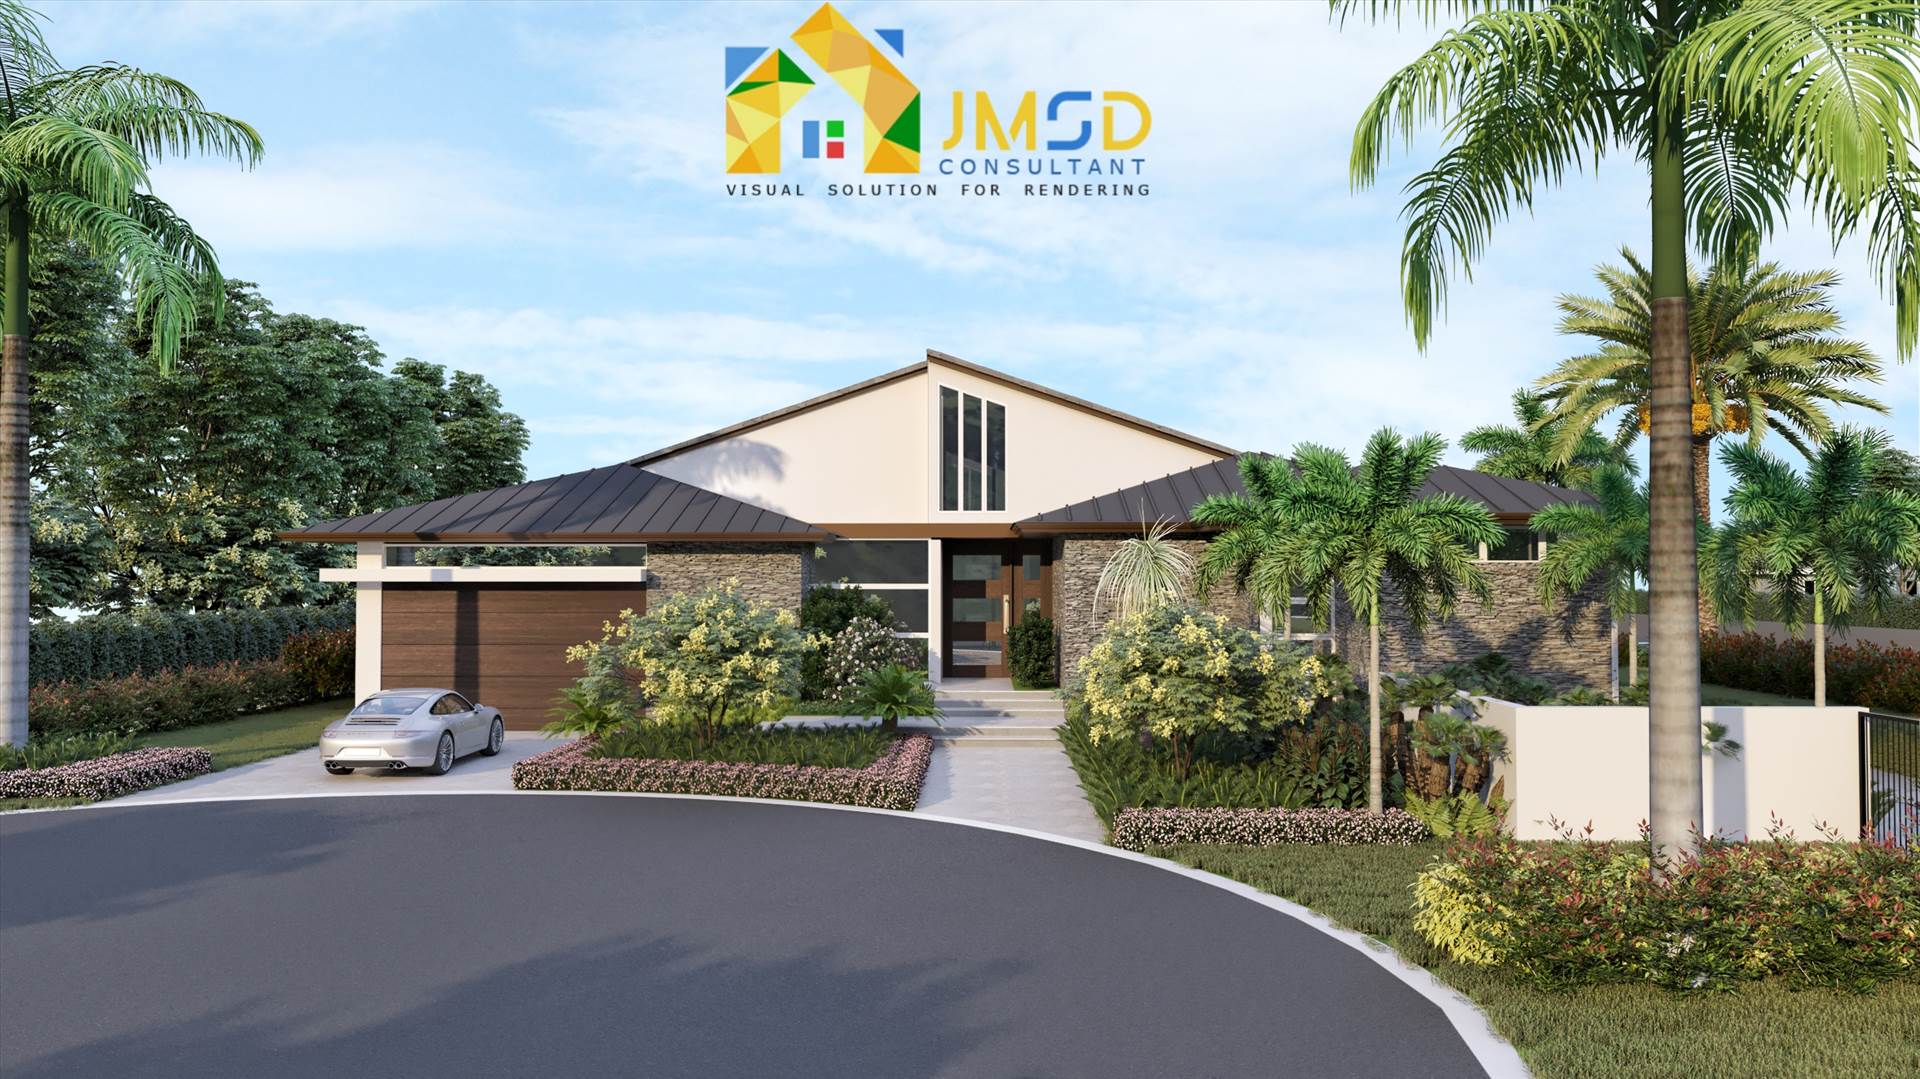 3D Exterior Rendering Front view of a Single Family Home in Fort Lauderdale Florida Single Family 3D Home Elevation Visualization Rendering in Fort Lauderdale Florida. go above and beyond with Hyper Photorealistic Visualization Images.

 by JMSDCONSULTANT